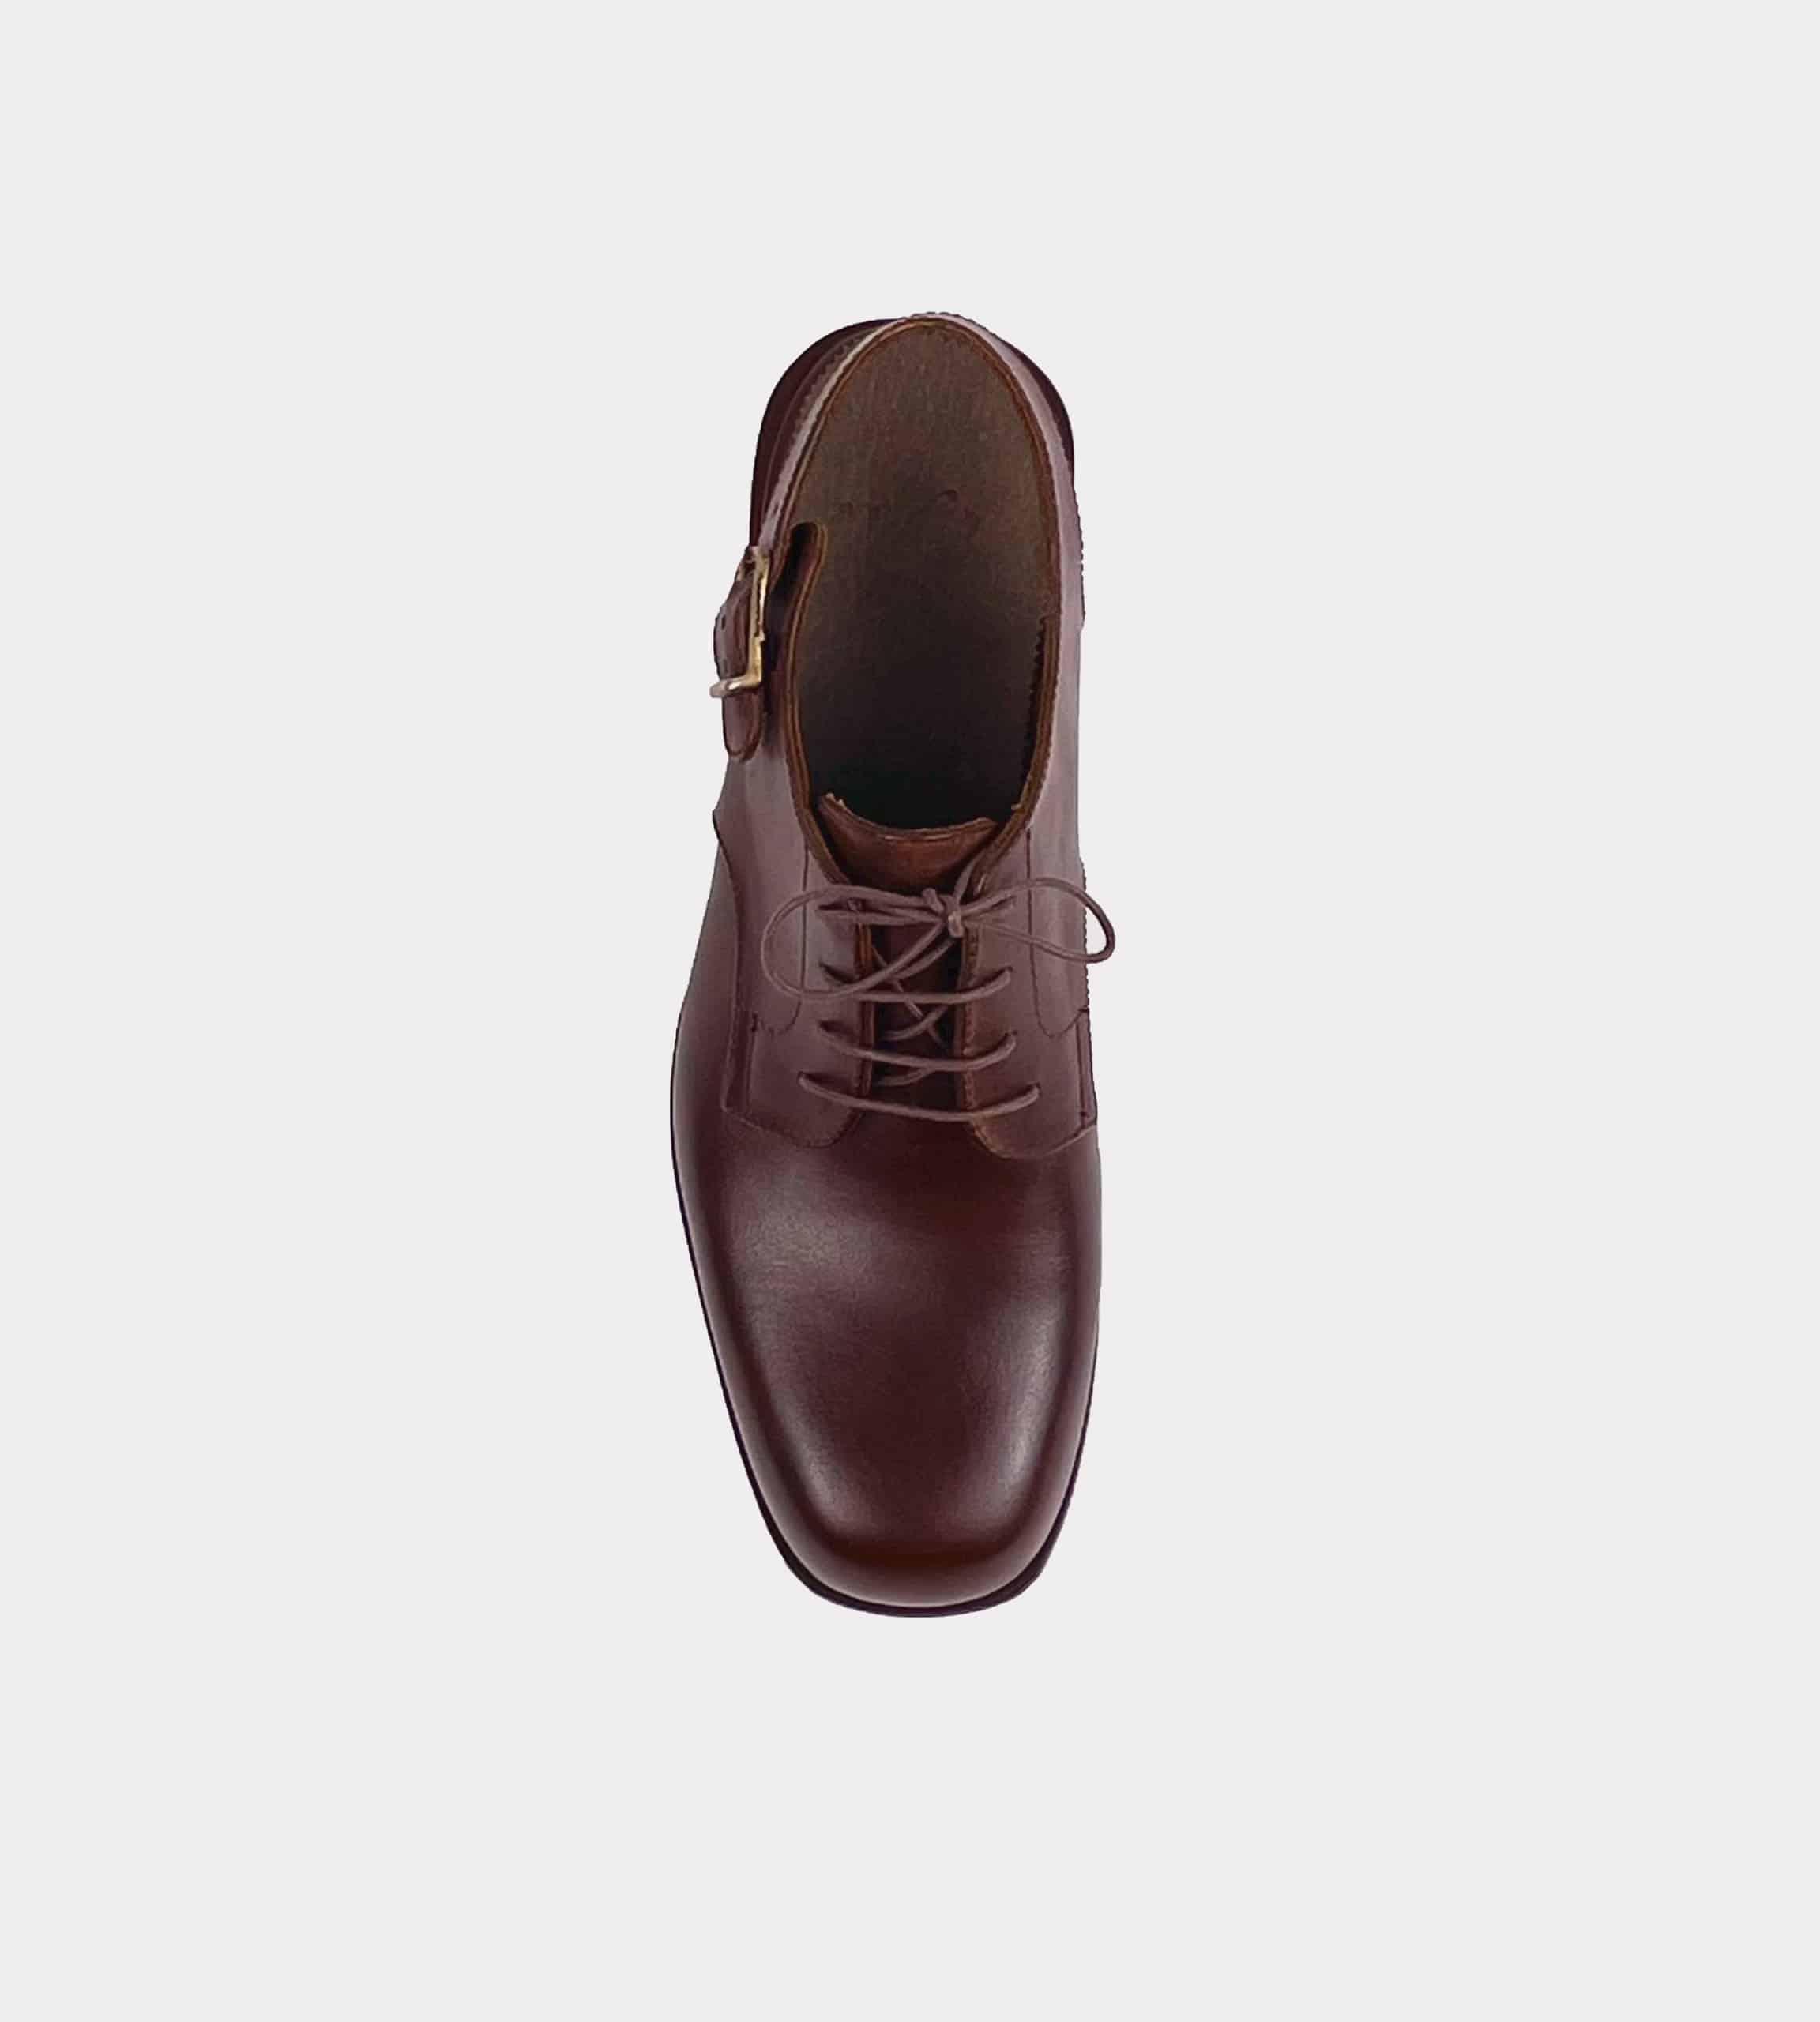 Brown leather open blucher overhead view